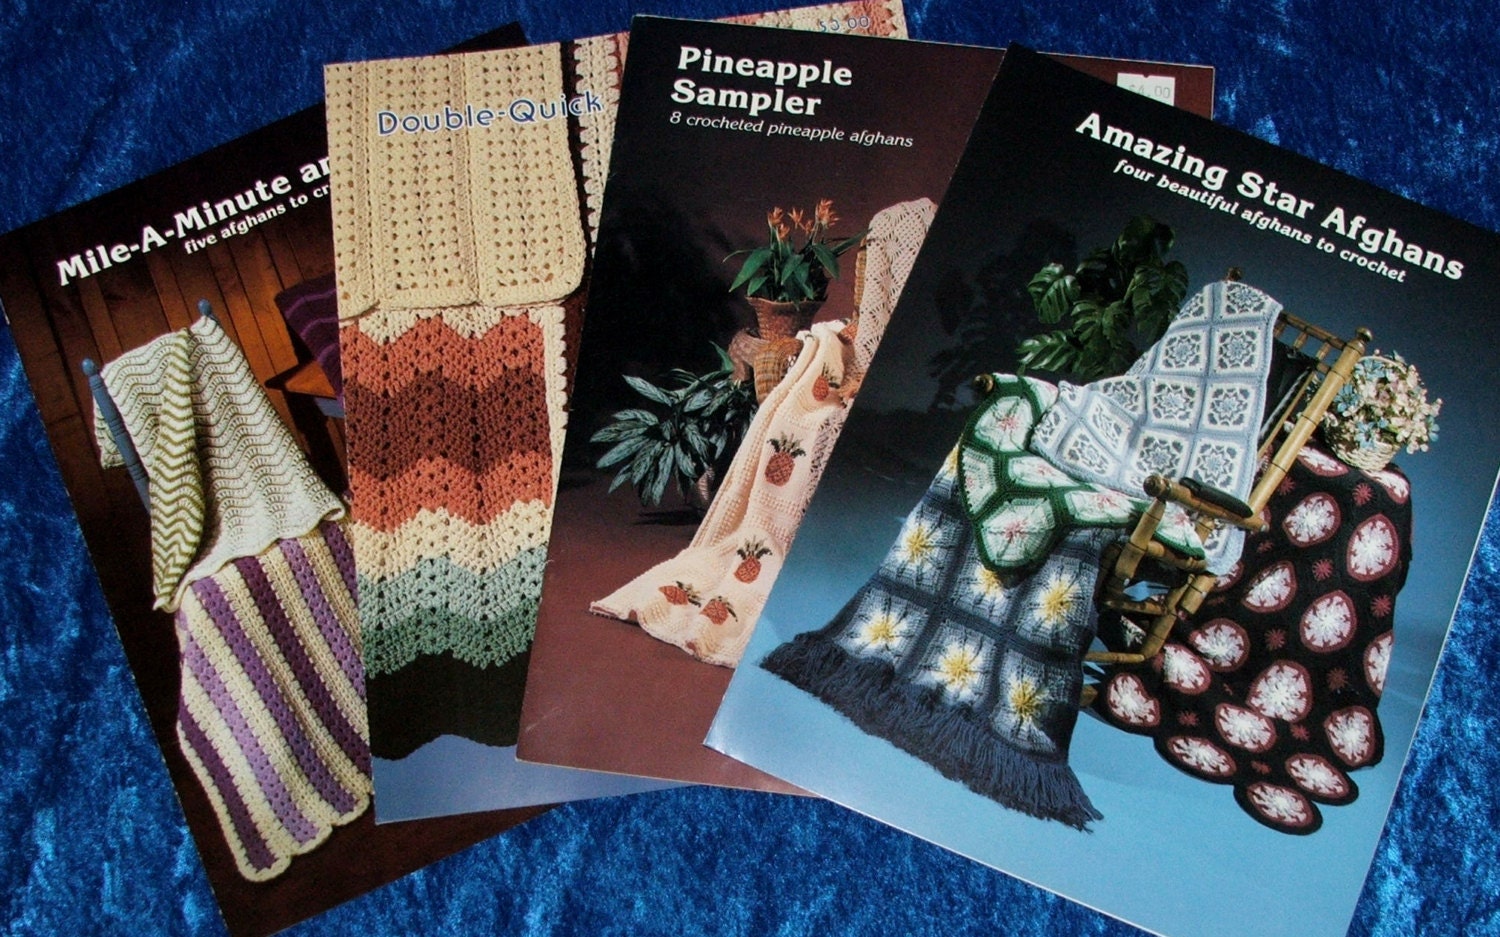 Lot 4 Crochet afghan pattern books A to Z Heirloom for Today crocheted  patterns 9781573673181